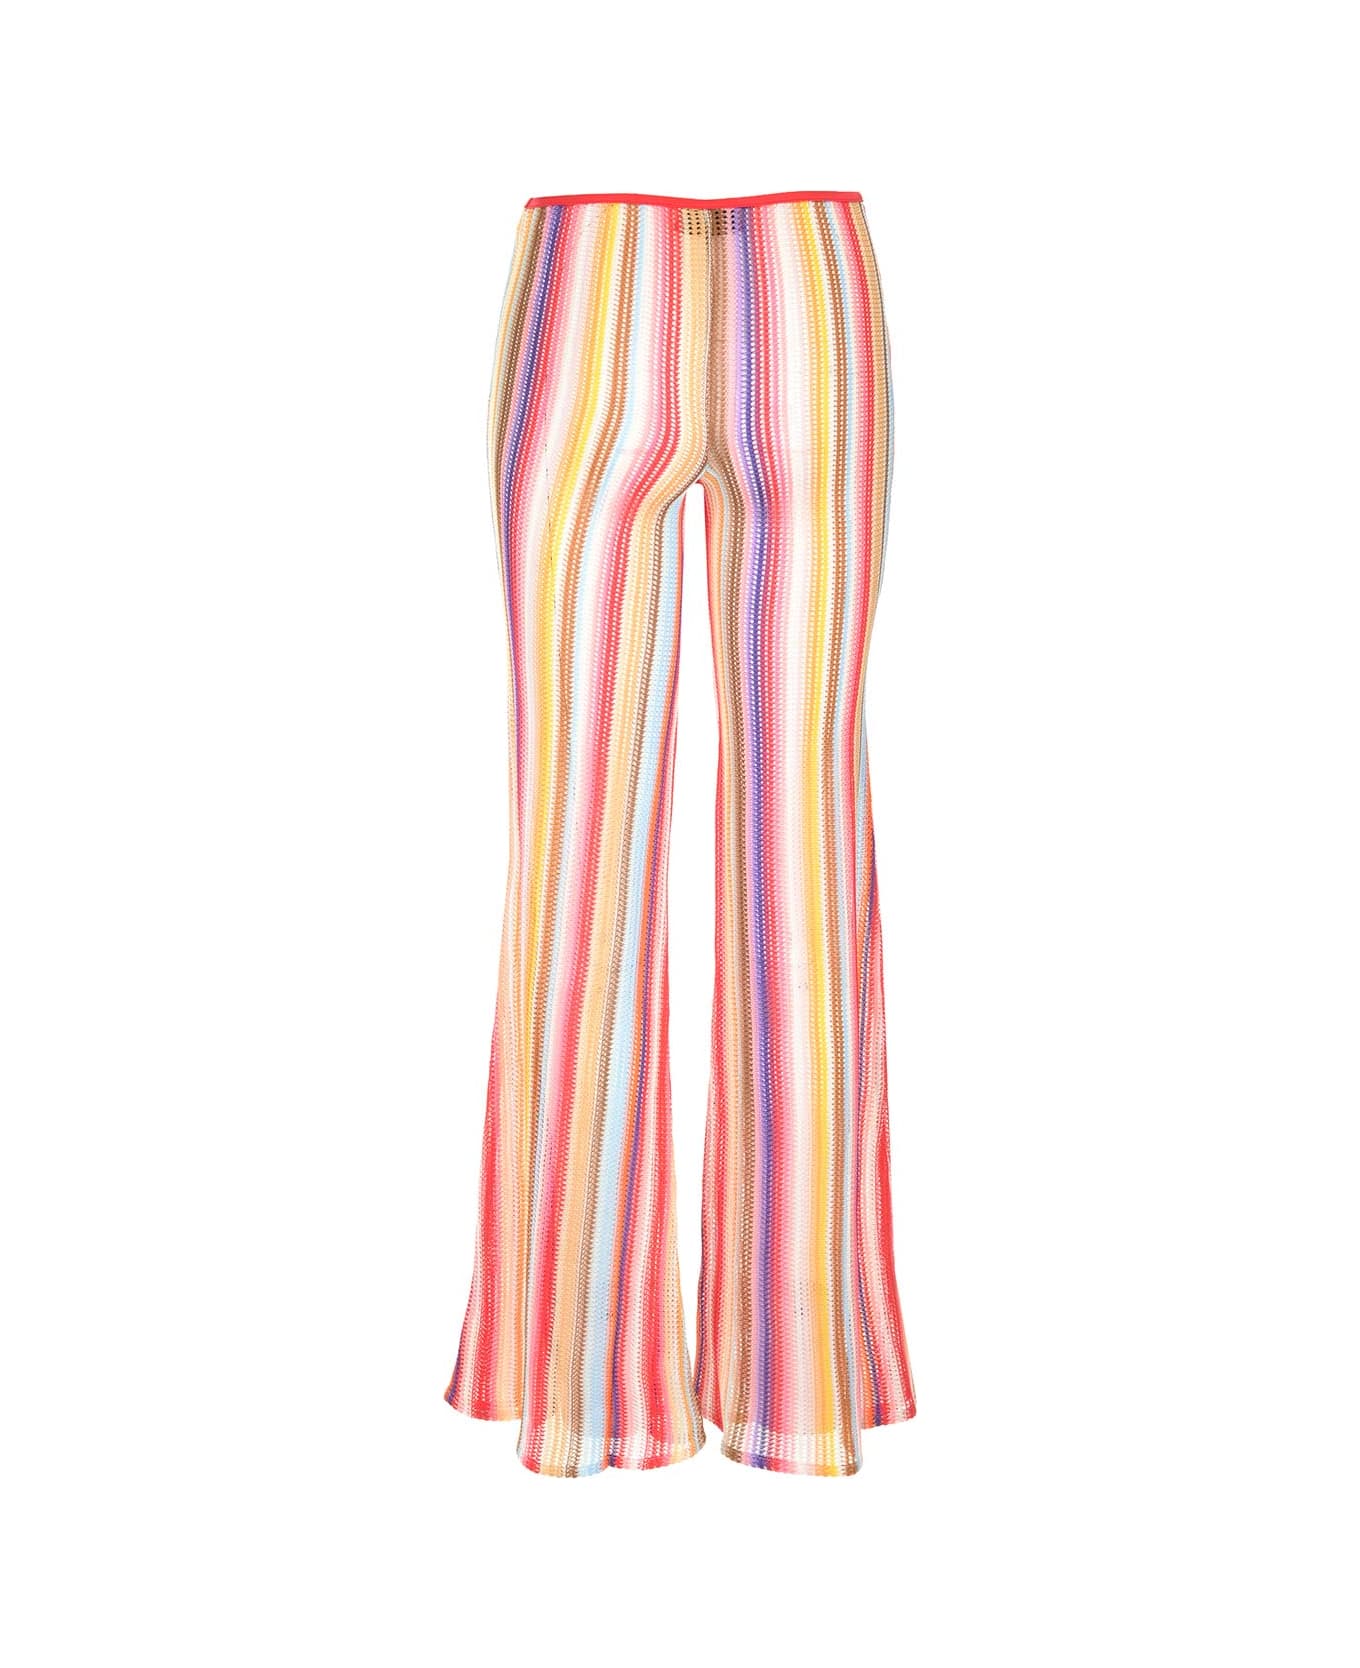 Missoni Flared Viscose Knit Trousers - Multicolor red strip